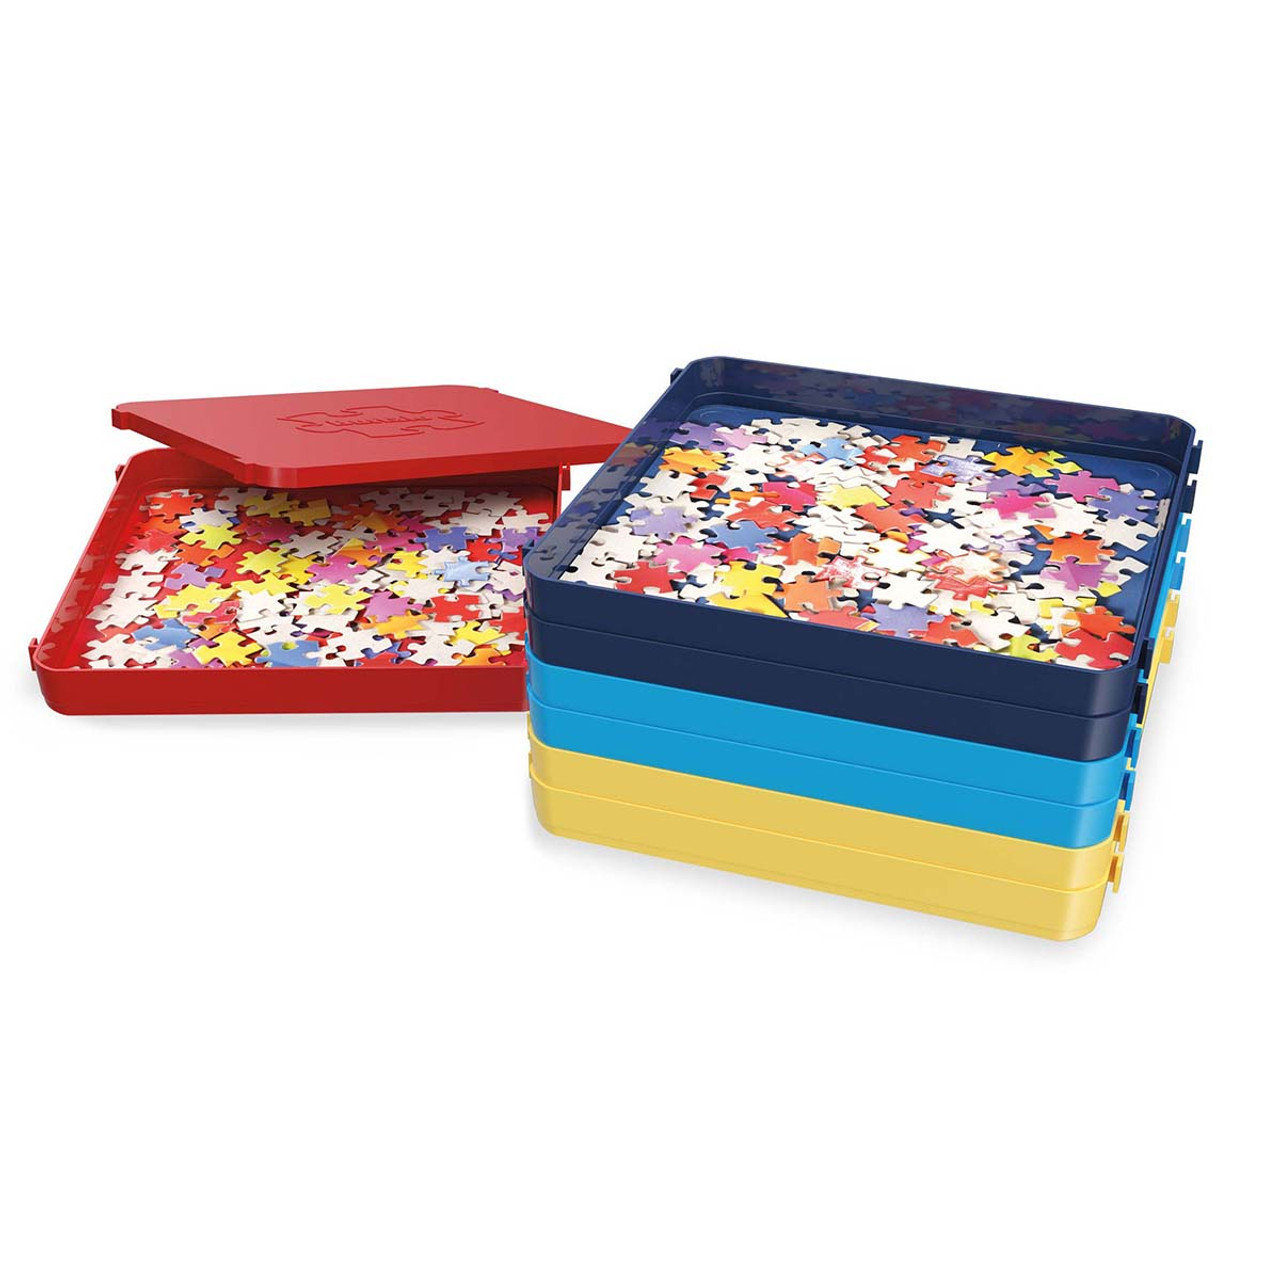 Puzzle Sorting Trays Stackable Puzzle Trays for Puzzles up to 1500